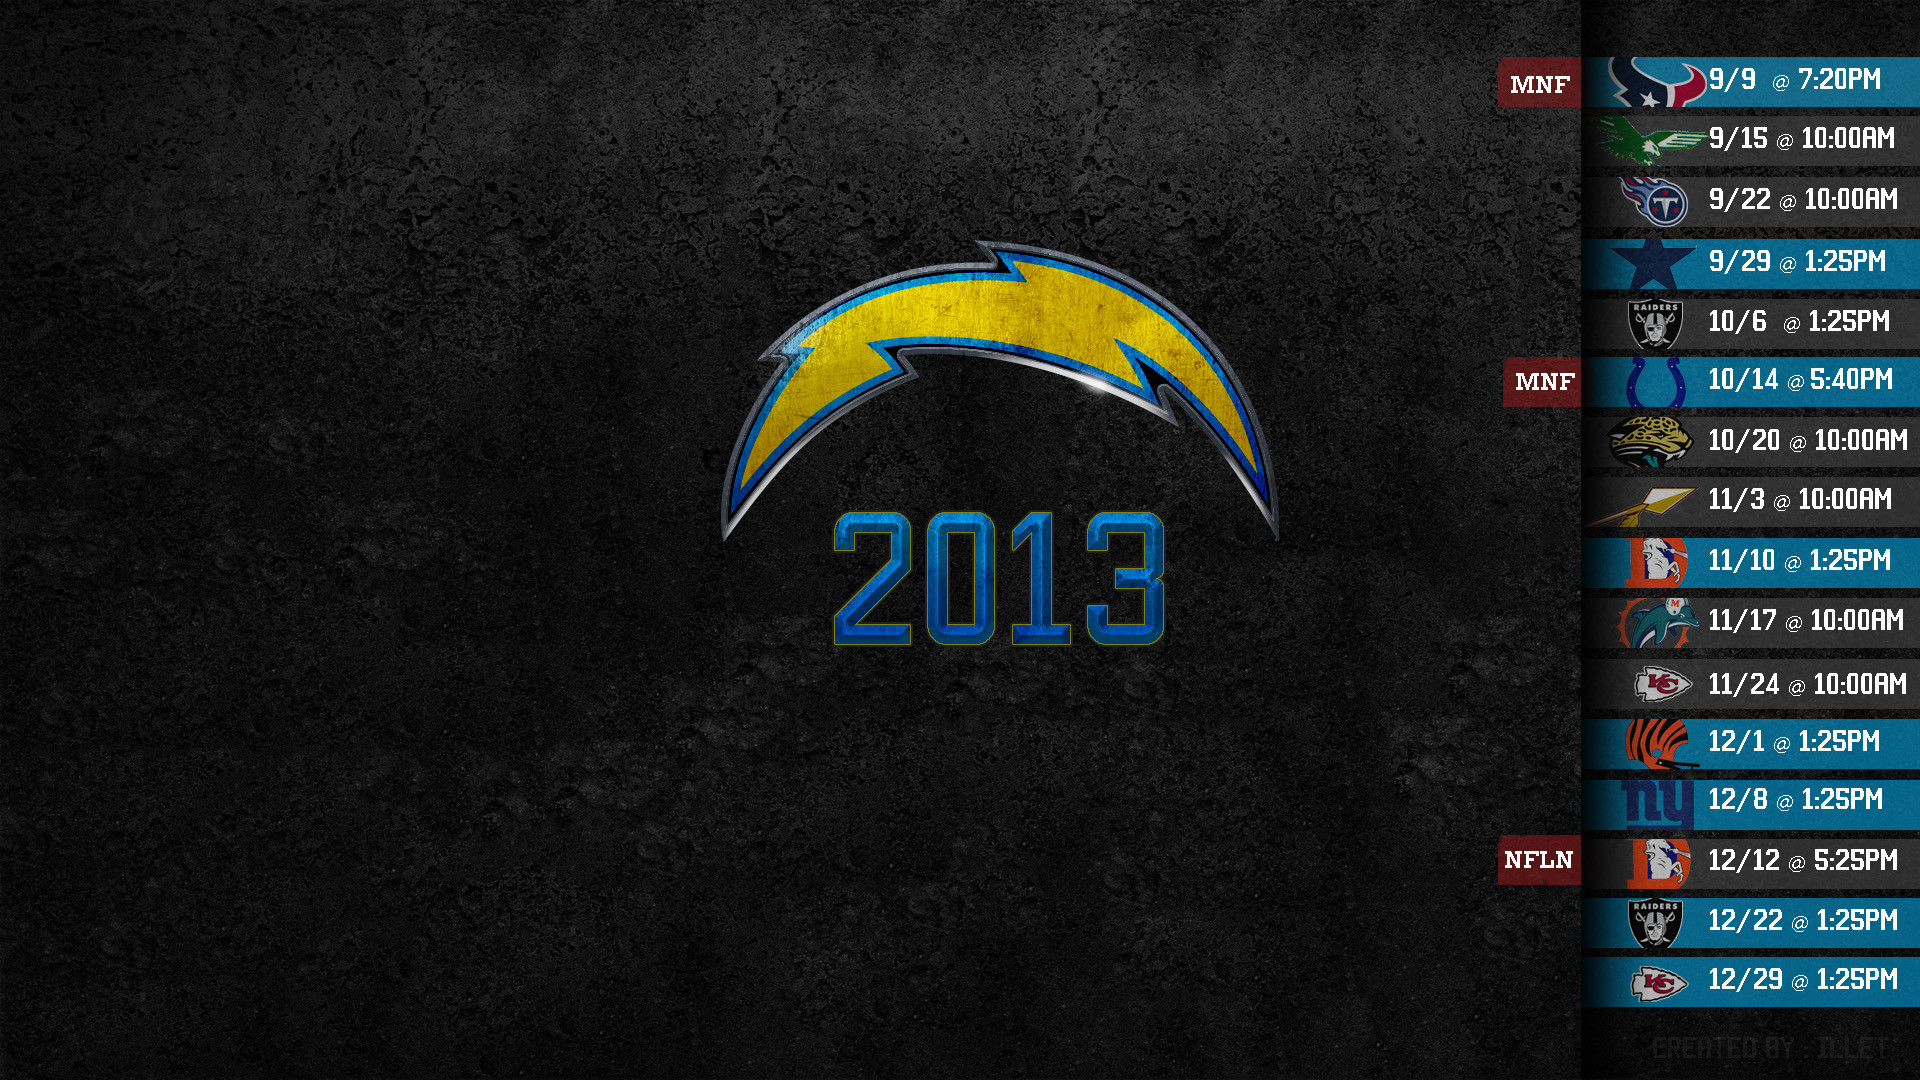 Chargers 2013 Wallpaper Schedule [1920x1080]   Imgur